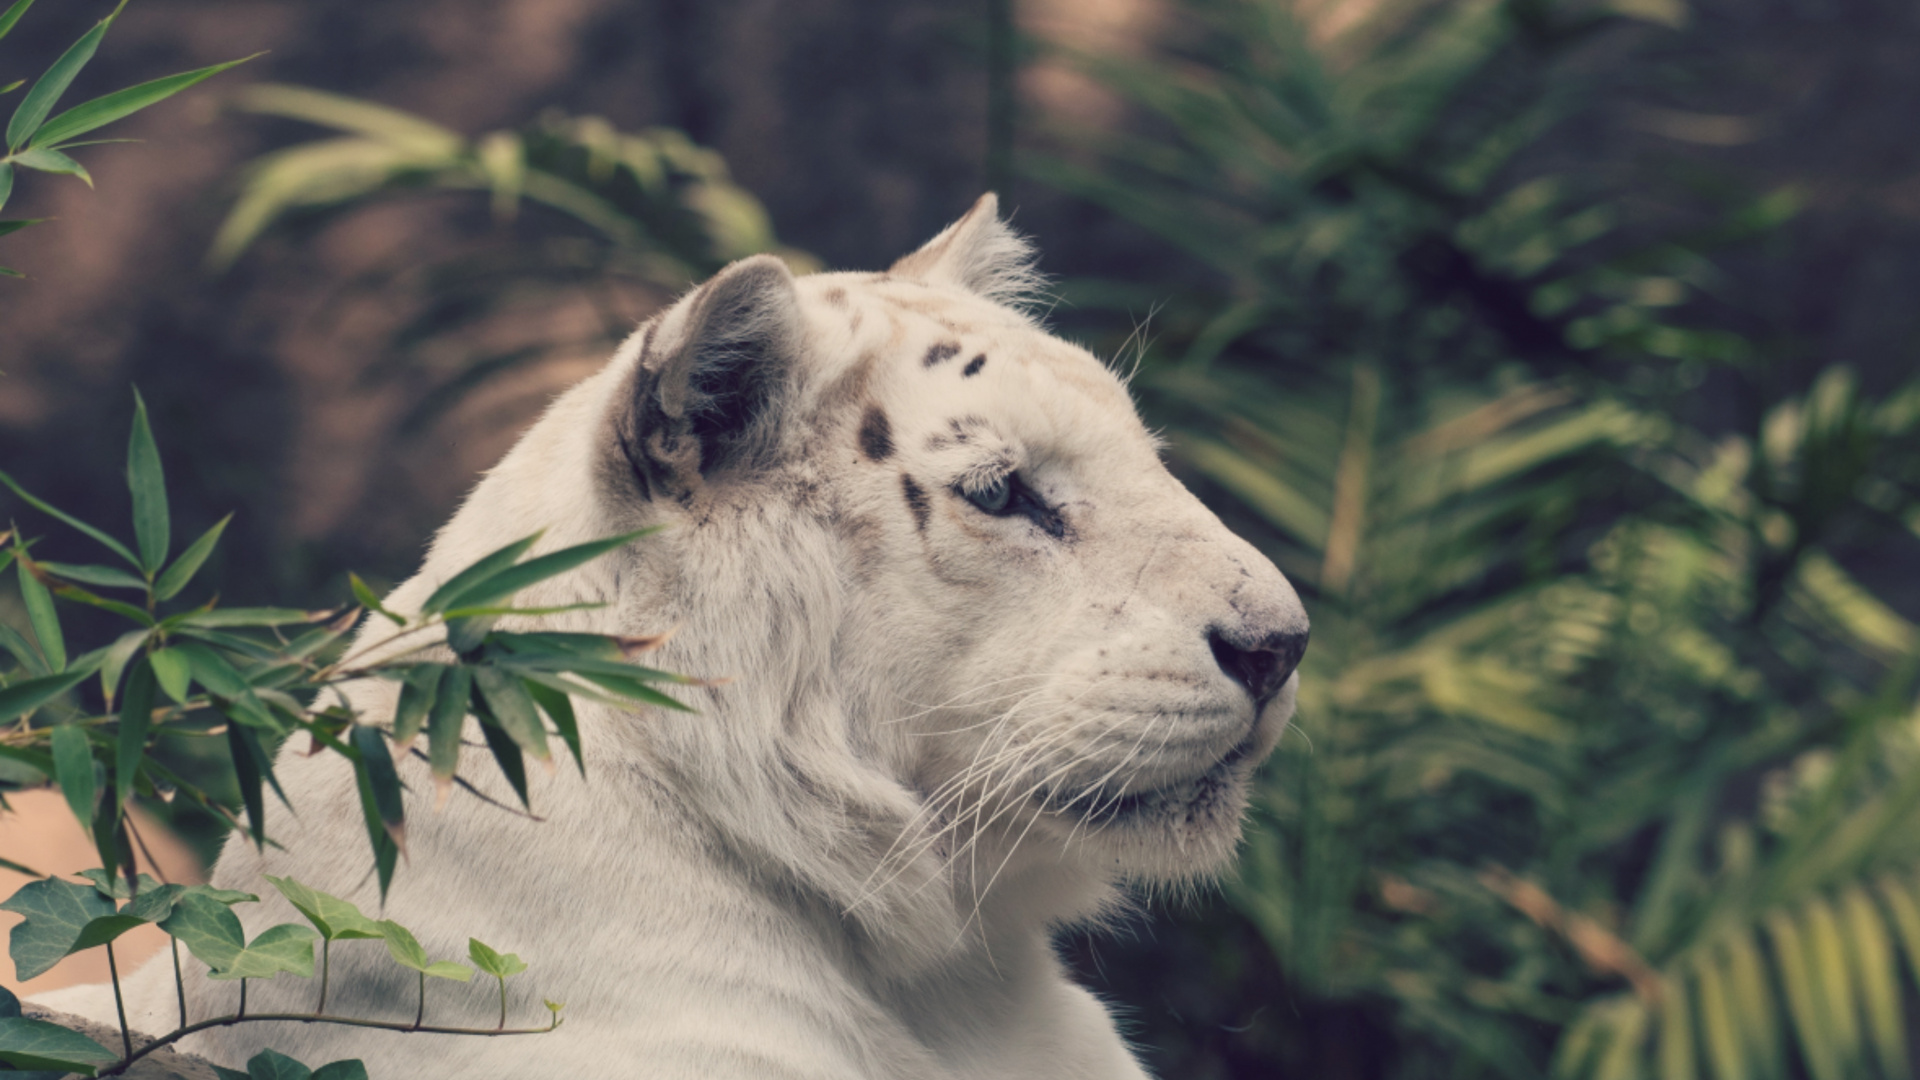 White Tiger Lying on Ground. Wallpaper in 1920x1080 Resolution